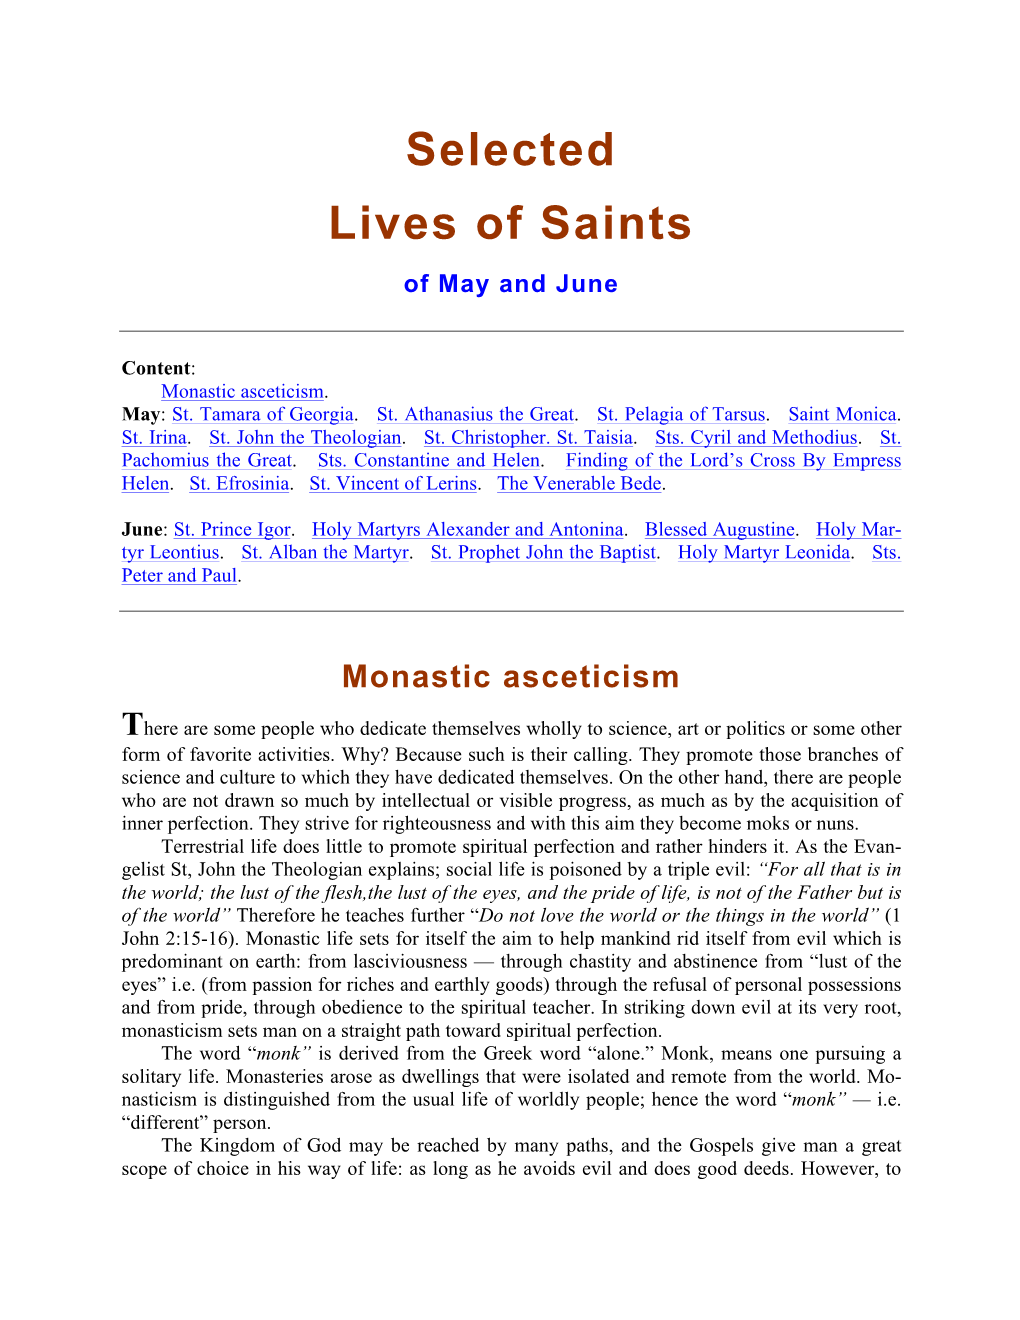 Selected Lives of Saints of May and June